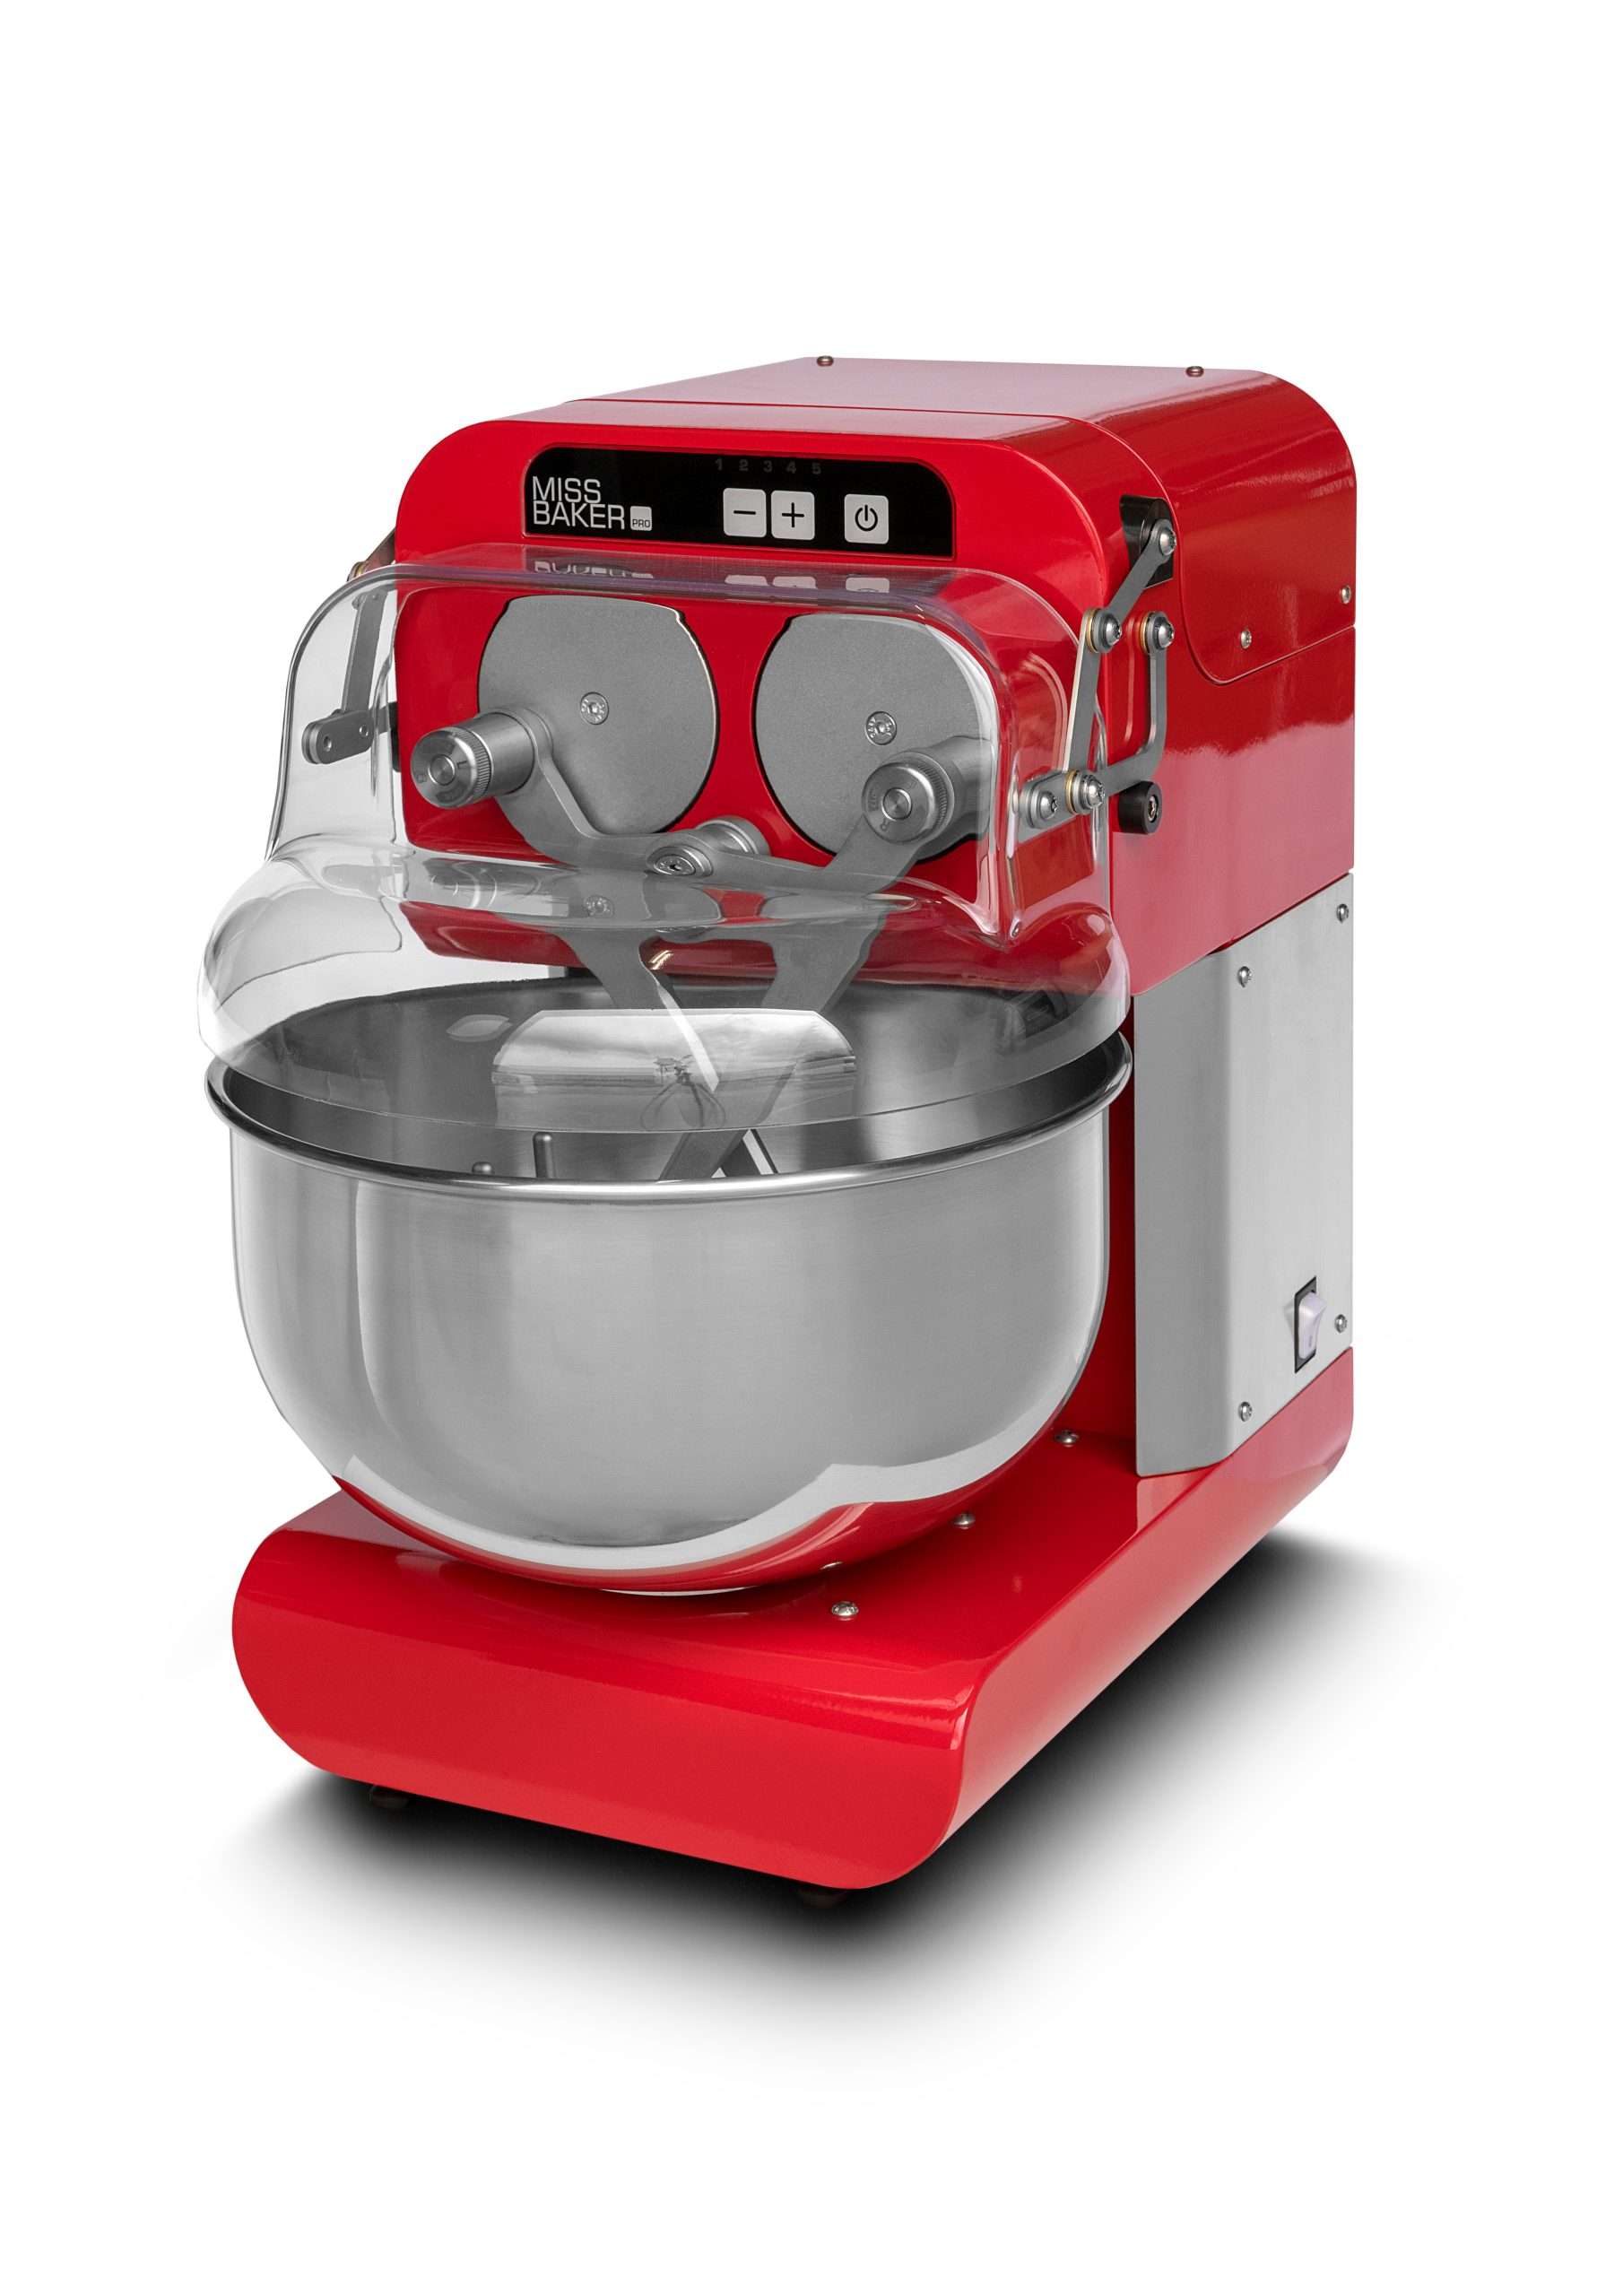 Miss Baker Pro – 4.5kg finished /10 Litre Double Arm Mixer, 5 speed, Red